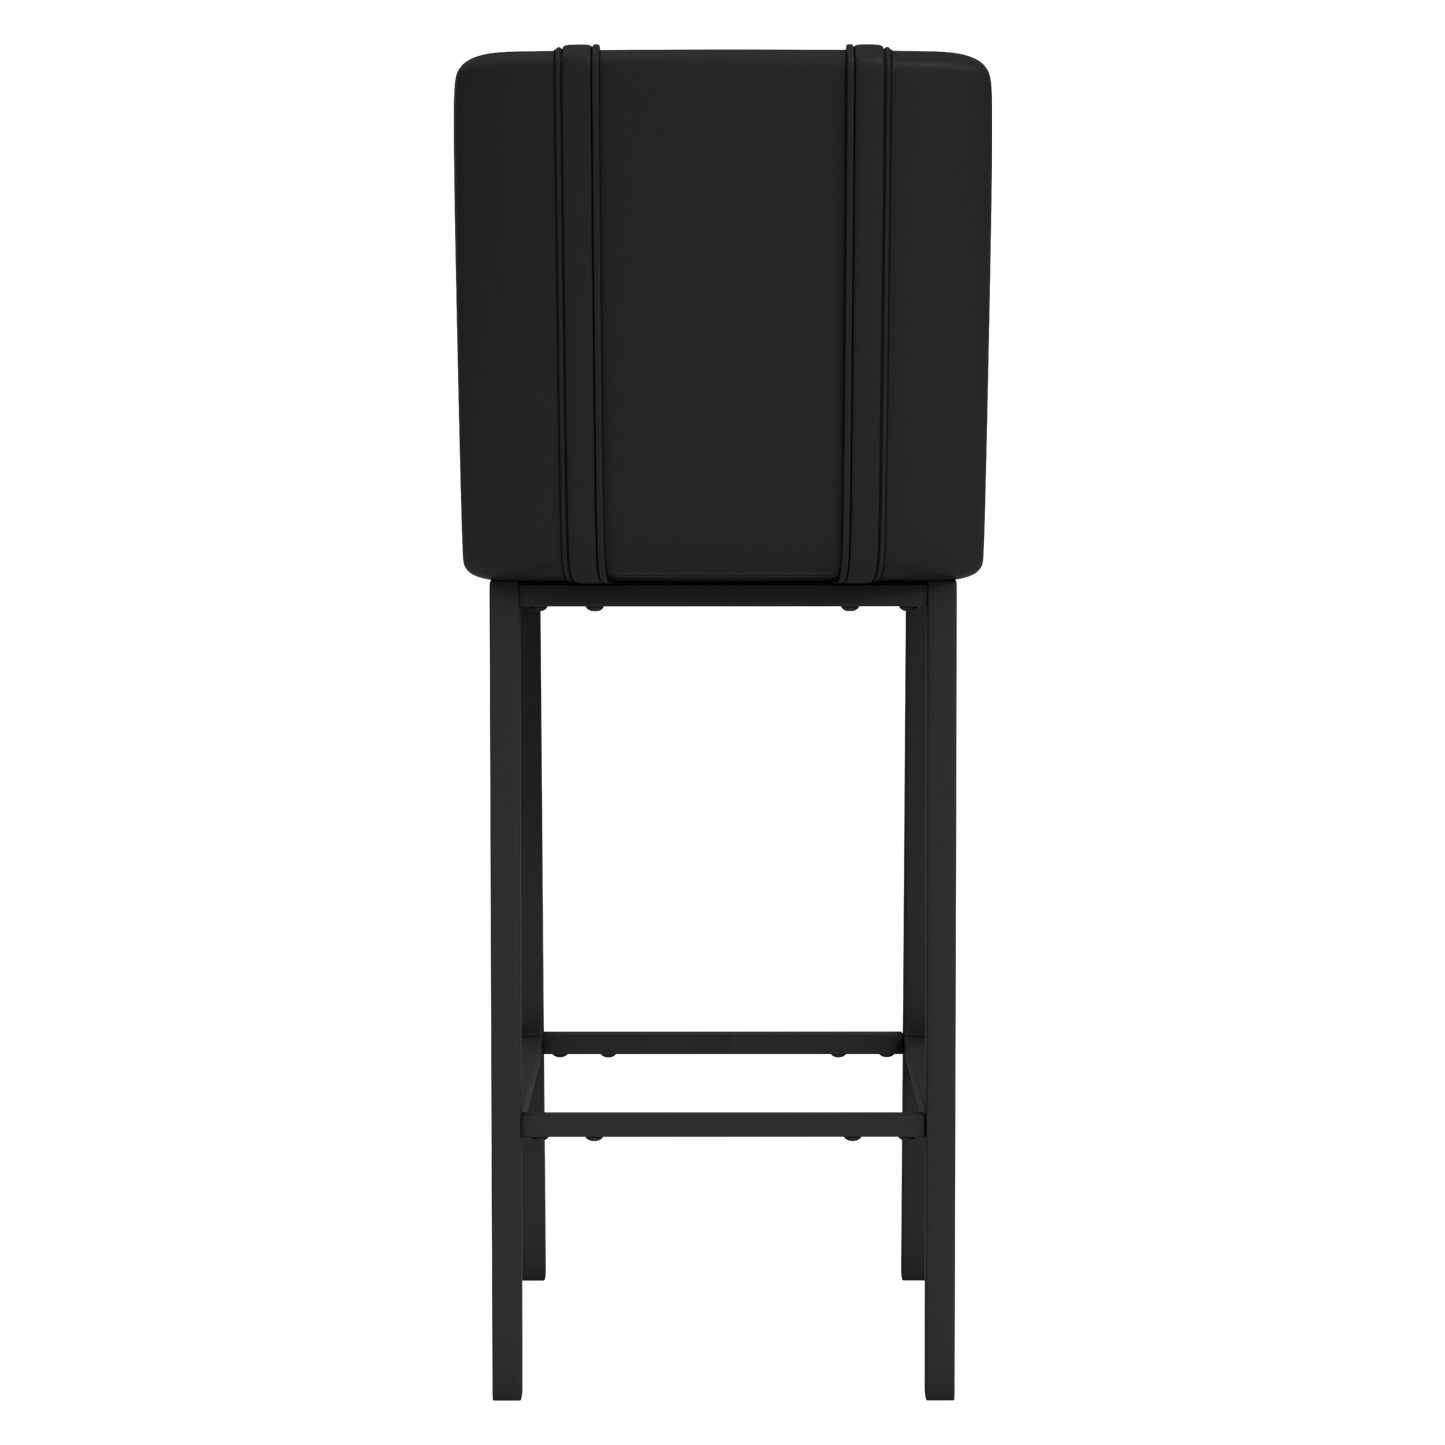 Bar Stool 500 with Utah State Aggies Secondary Logo Set of 2